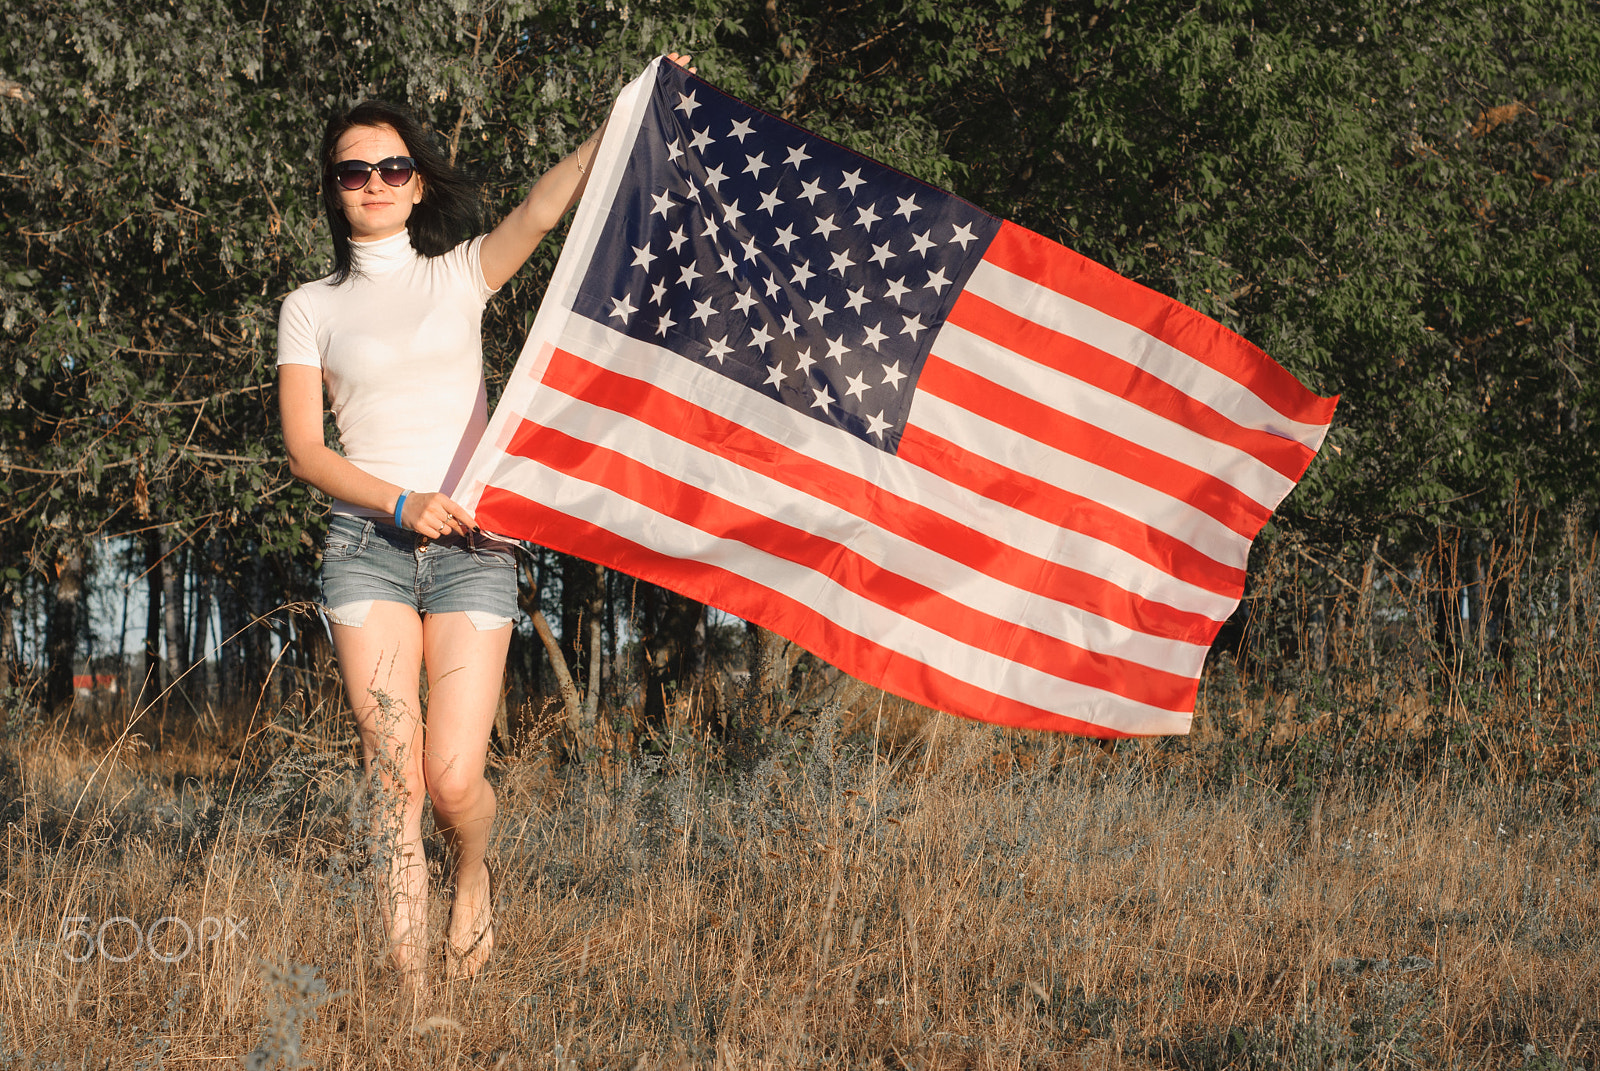 Nikon D80 sample photo. The girl with the american flag outdoors, stars and stripes flag flutters in the wind, photography